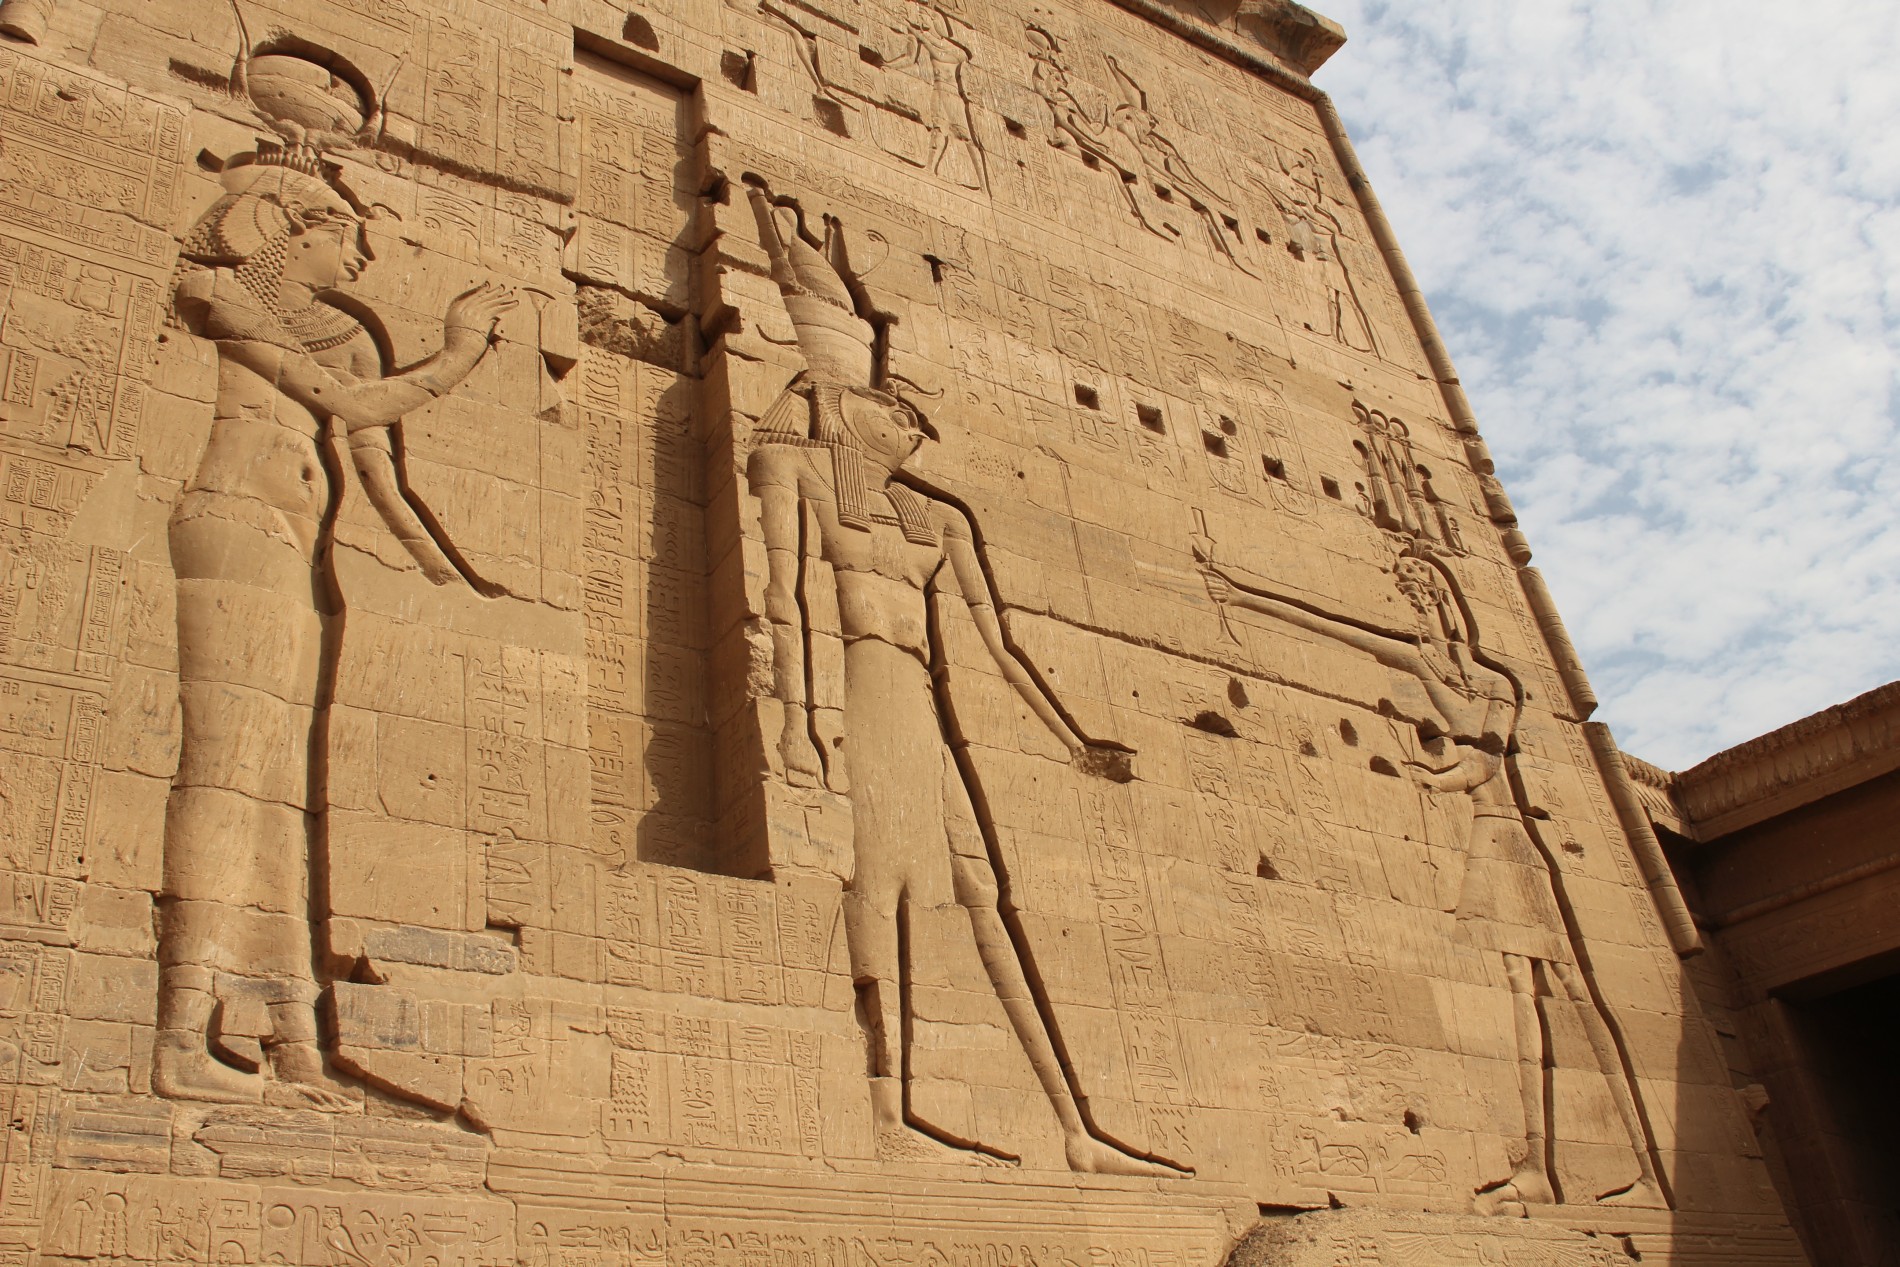 Carvings of Isis, Horus, and Osiris appear on the First Pylon of the Temple of Isis on Philae Island, Egypt.